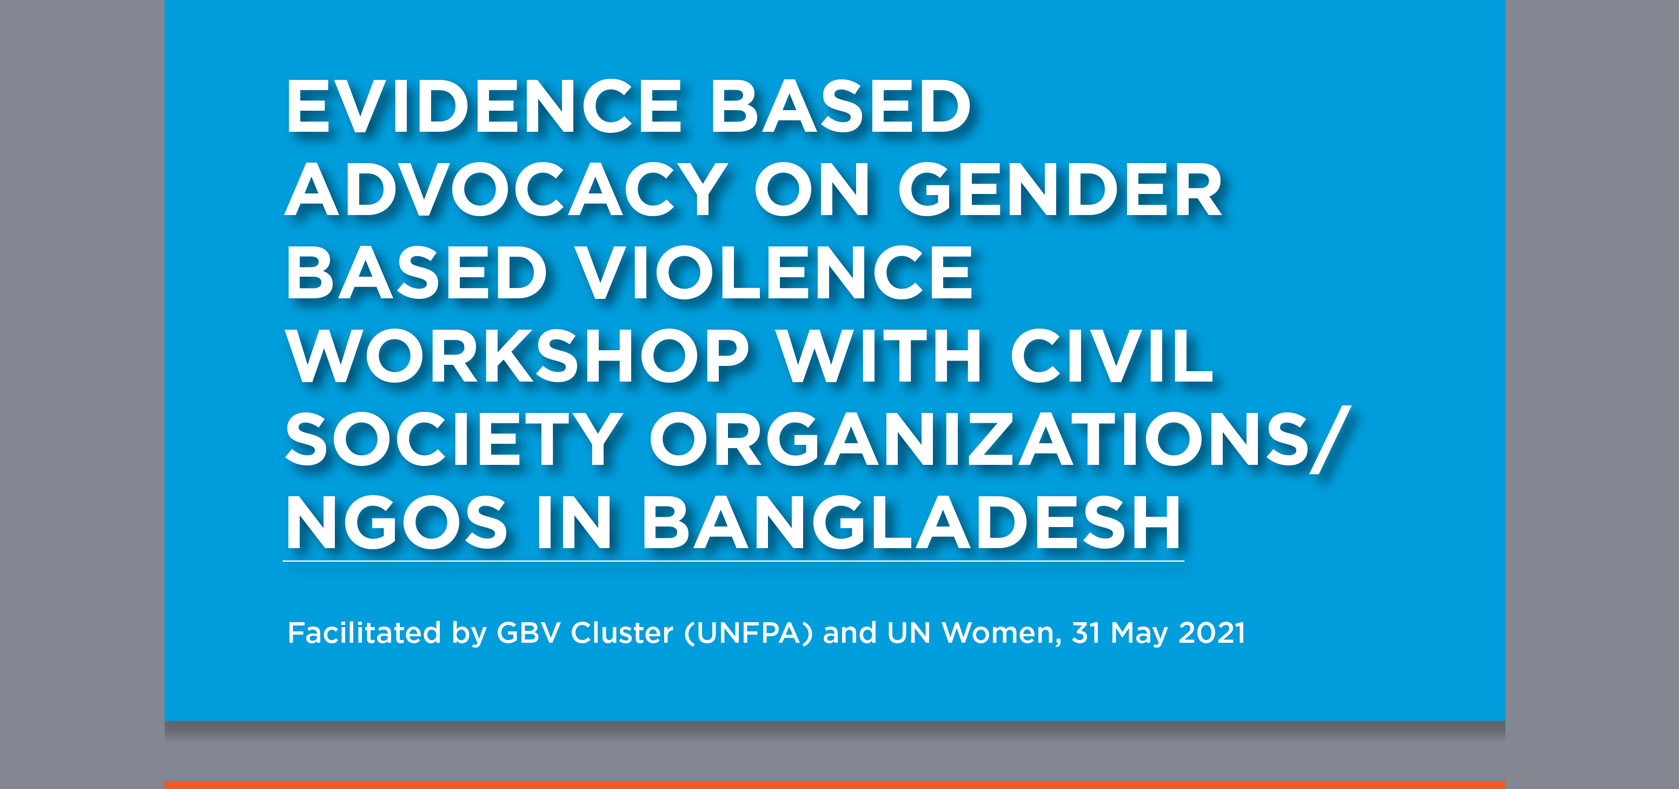 EVIDENCE BASED ADVOCACY ON GENDER BASED VIOLENCE WORKSHOP WITH CIVIL SOCIETY ORGANIZATIONS/ NGOS IN BANGLADESH